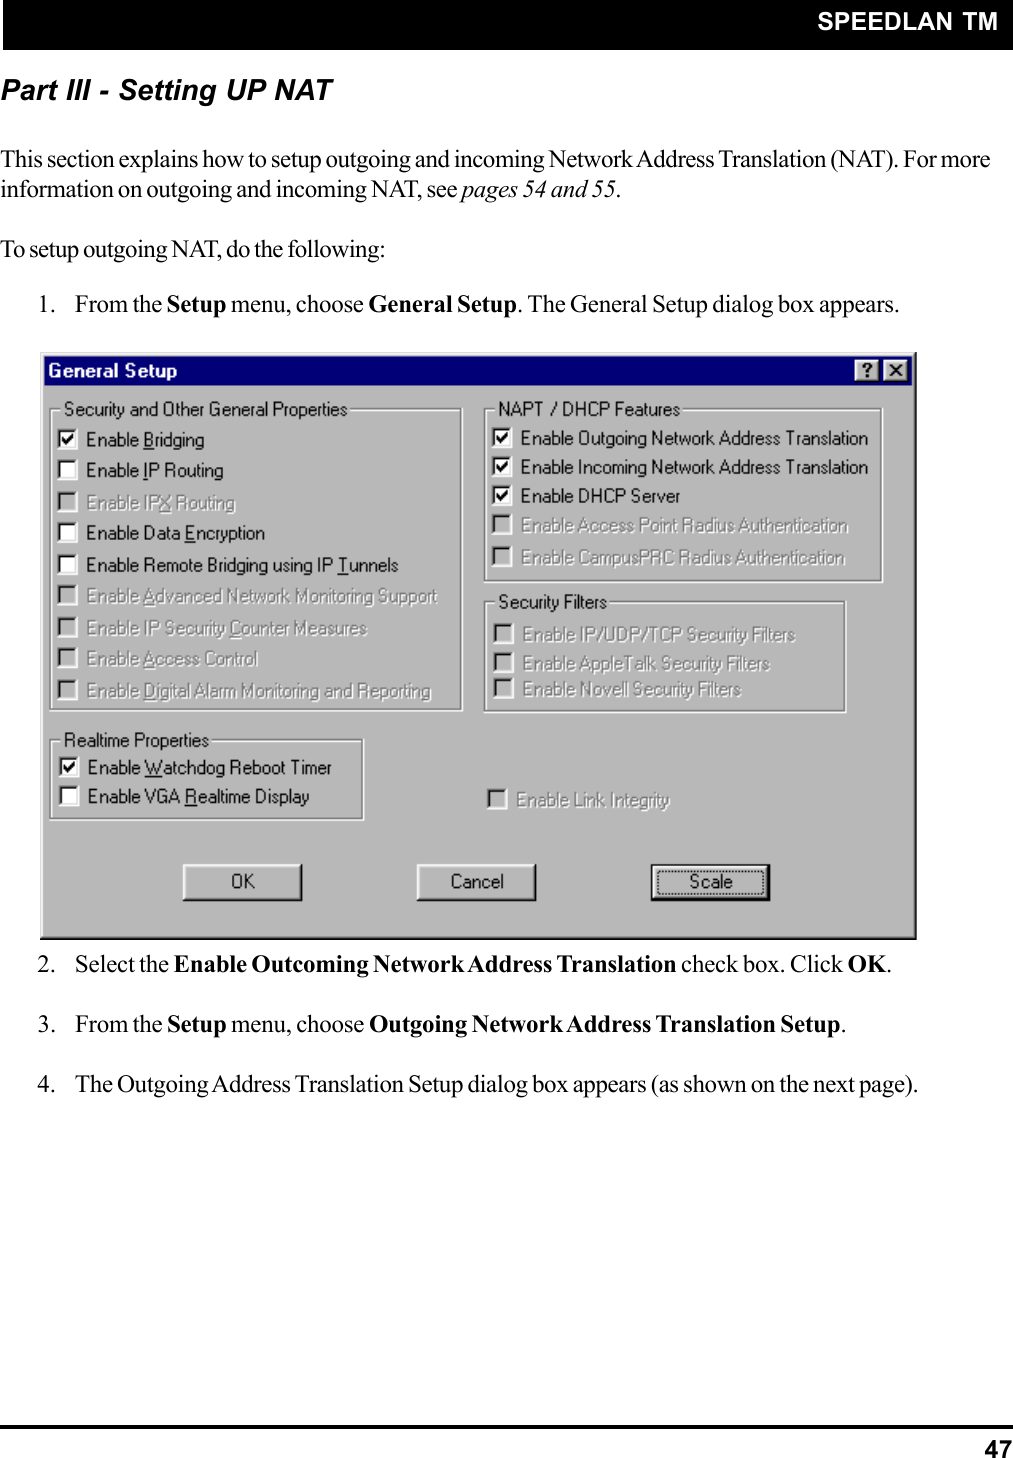 SPEEDLAN TM47Part III - Setting UP NATThis section explains how to setup outgoing and incoming Network Address Translation (NAT). For moreinformation on outgoing and incoming NAT, see pages 54 and 55.To setup outgoing NAT, do the following:1. From the Setup menu, choose General Setup. The General Setup dialog box appears.2. Select the Enable Outcoming Network Address Translation check box. Click OK.3. From the Setup menu, choose Outgoing Network Address Translation Setup.4. The Outgoing Address Translation Setup dialog box appears (as shown on the next page).